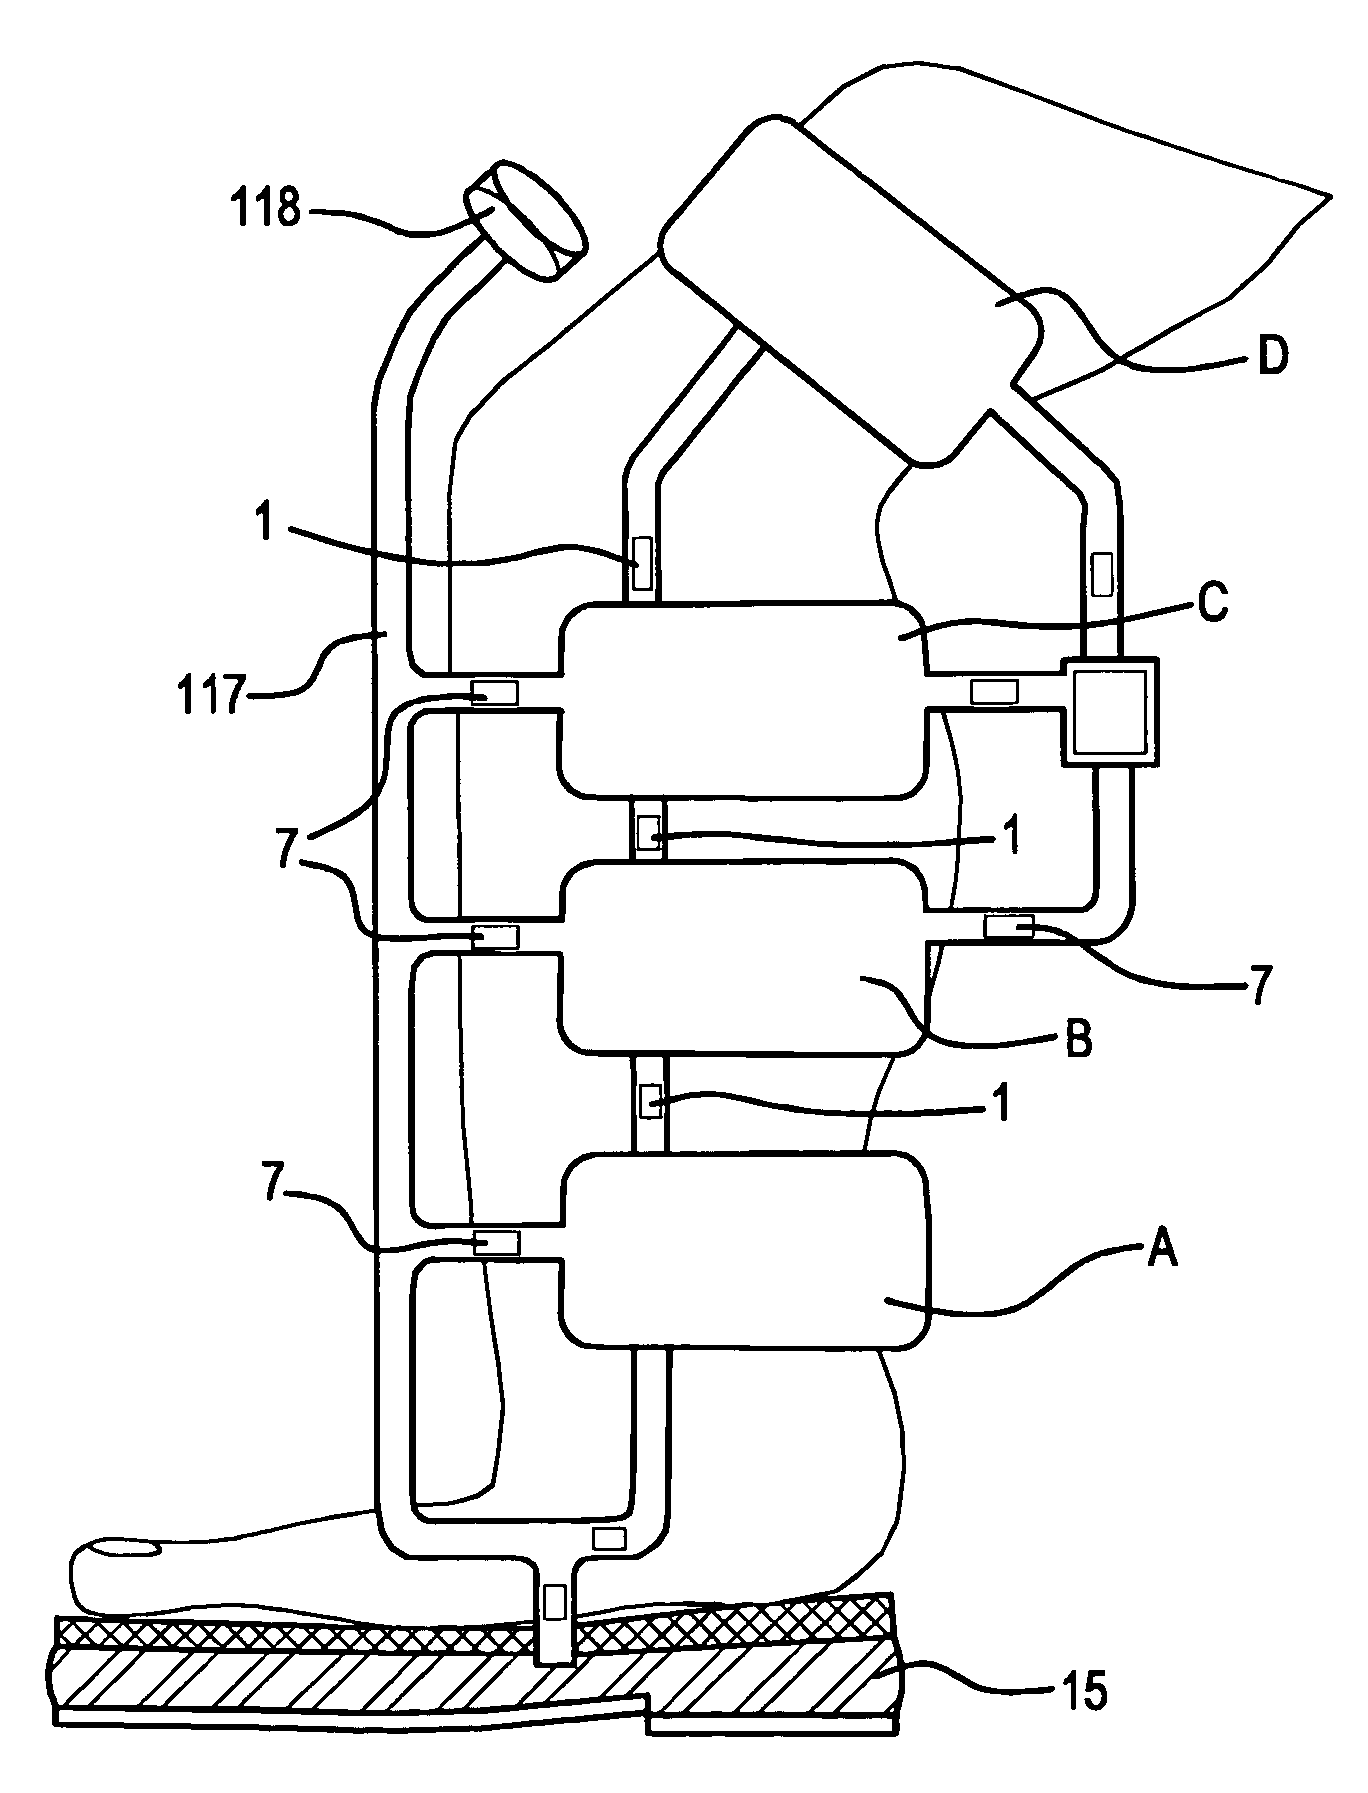 Device and method for low pressure compression and valve for use in the system